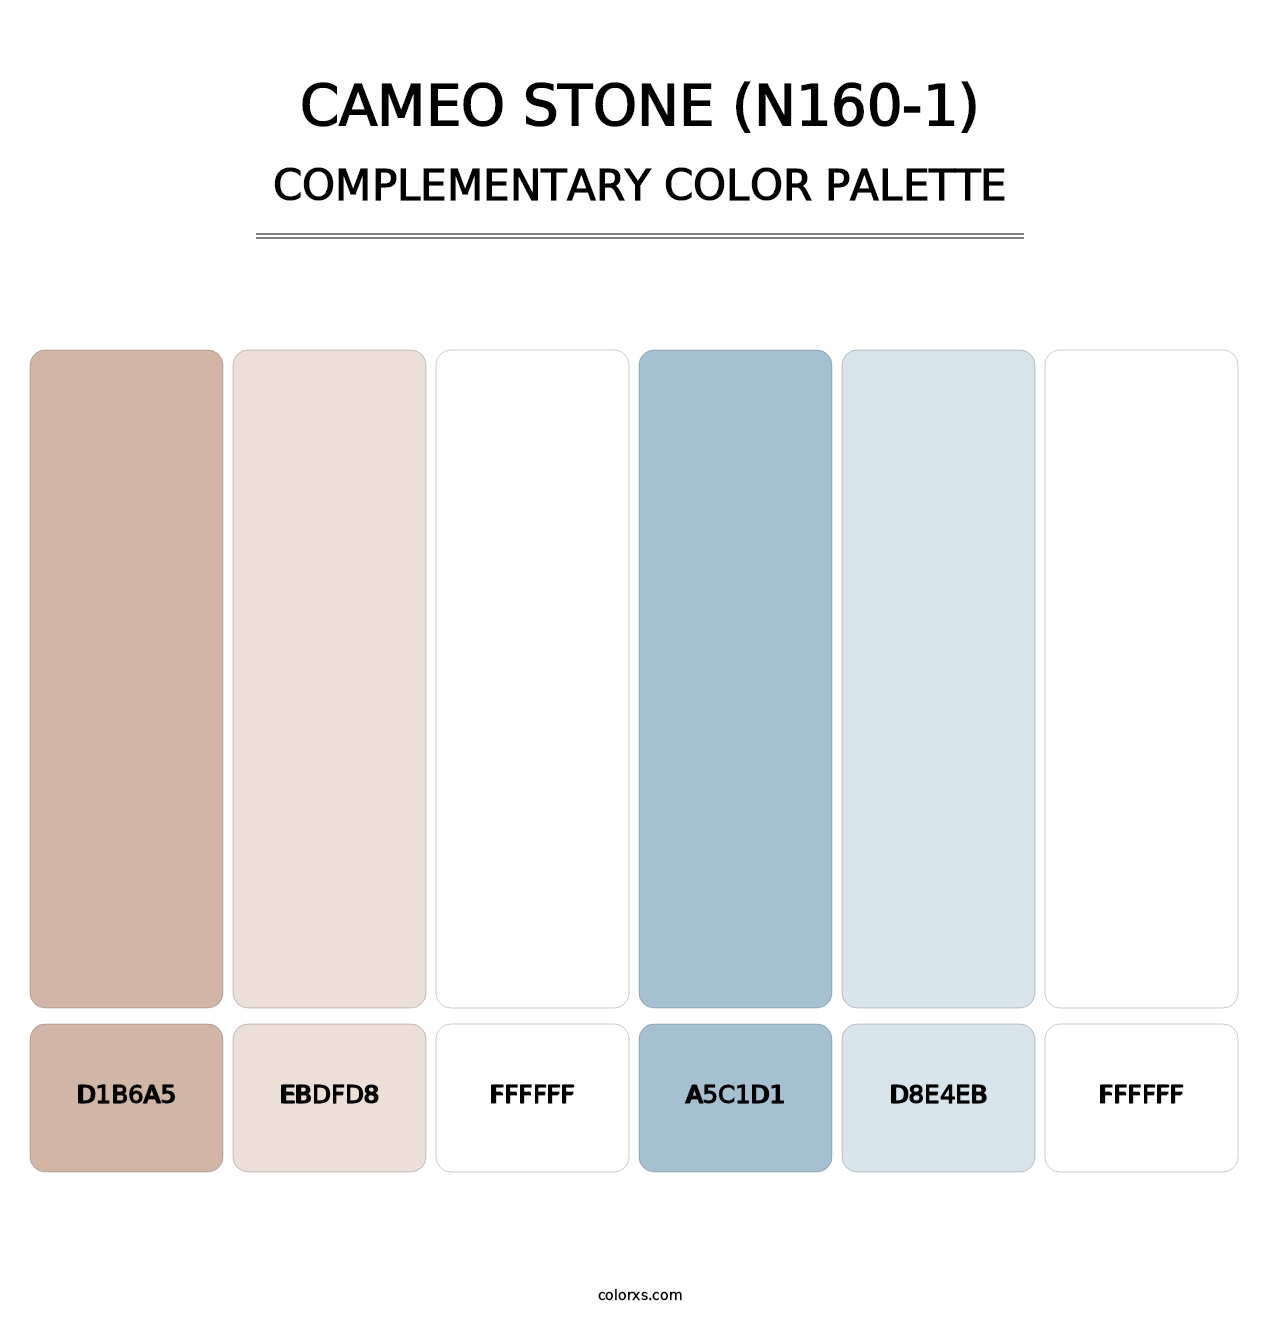 Cameo Stone (N160-1) - Complementary Color Palette